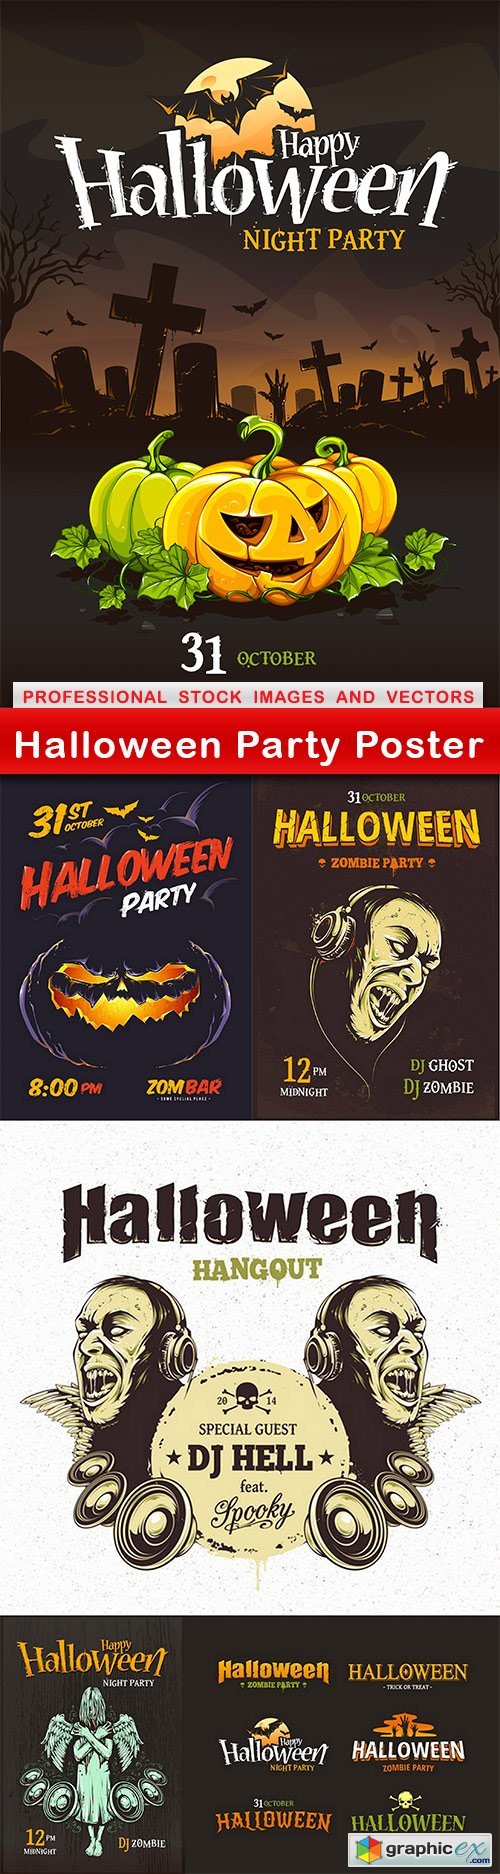 Halloween Party Poster - 6 EPS